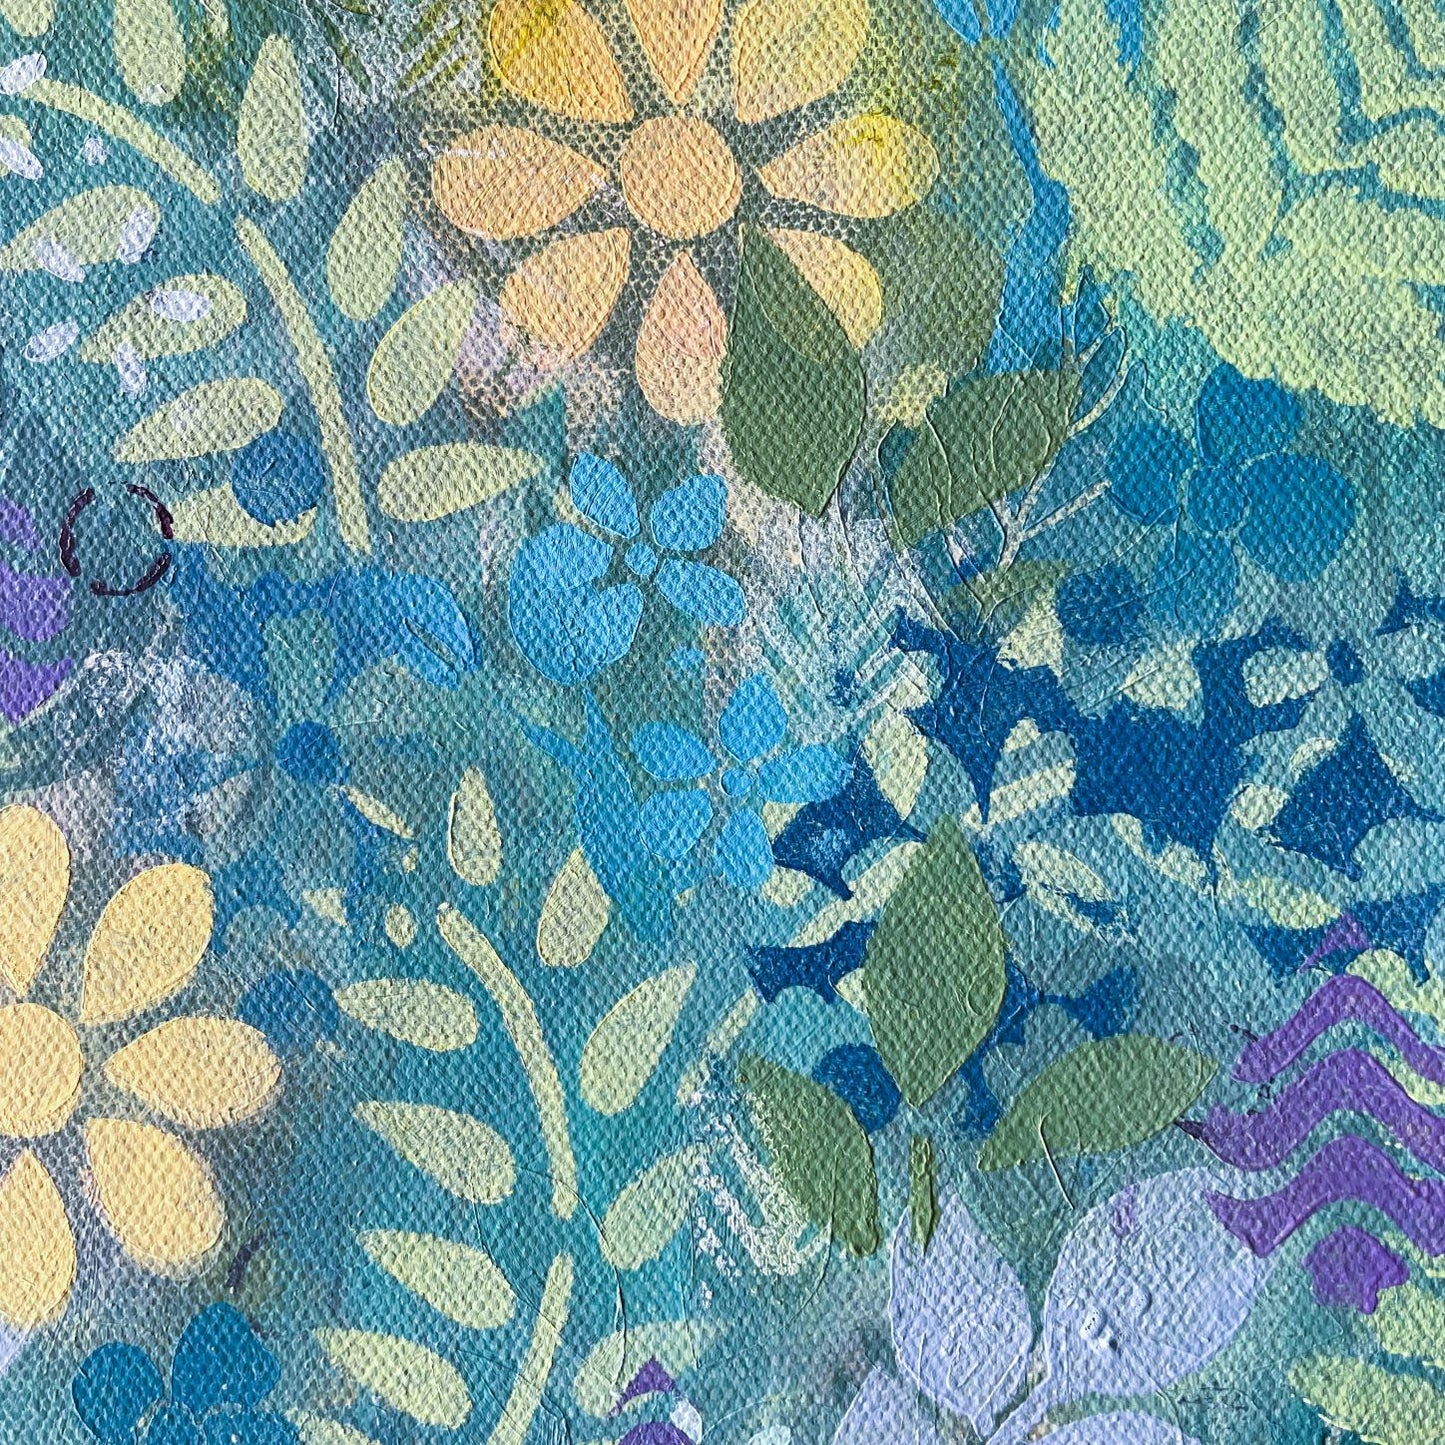 detail of abstract floral painting on canvas sunny yellow flowers and small blue flowers green leaves purple accents refreshing jungle feel